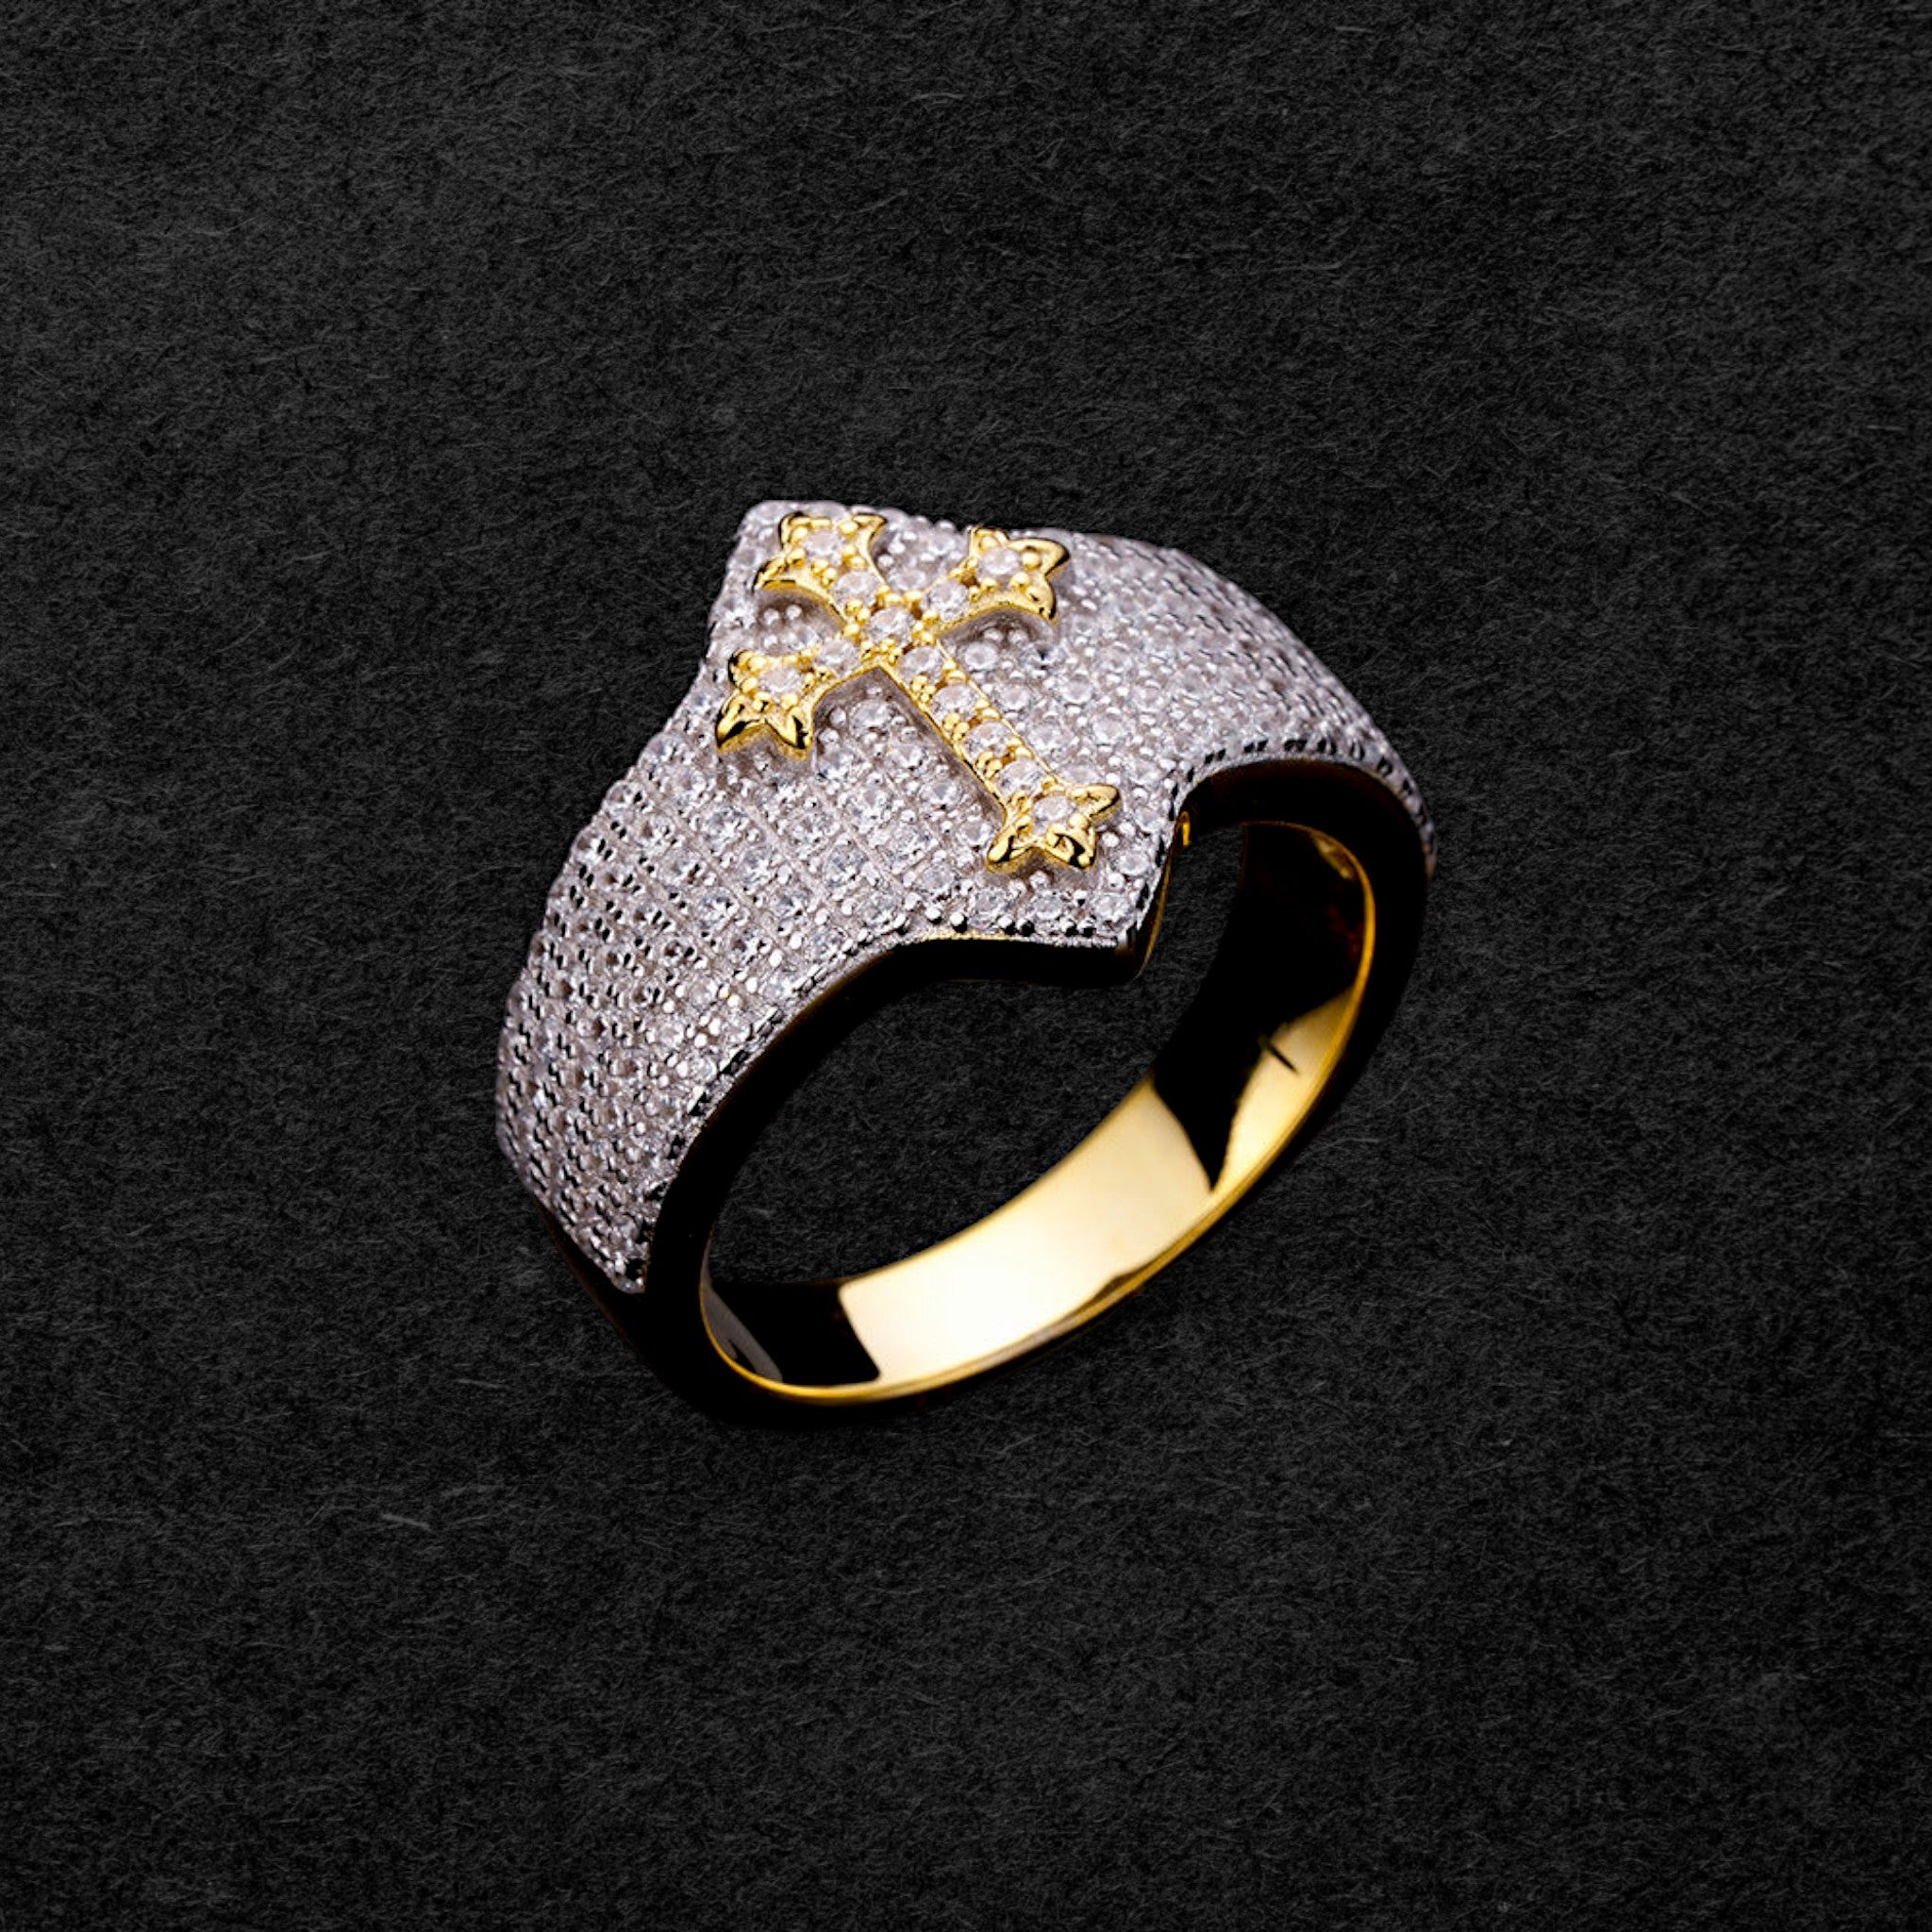 Stylish Silver Clustered Cross Ring